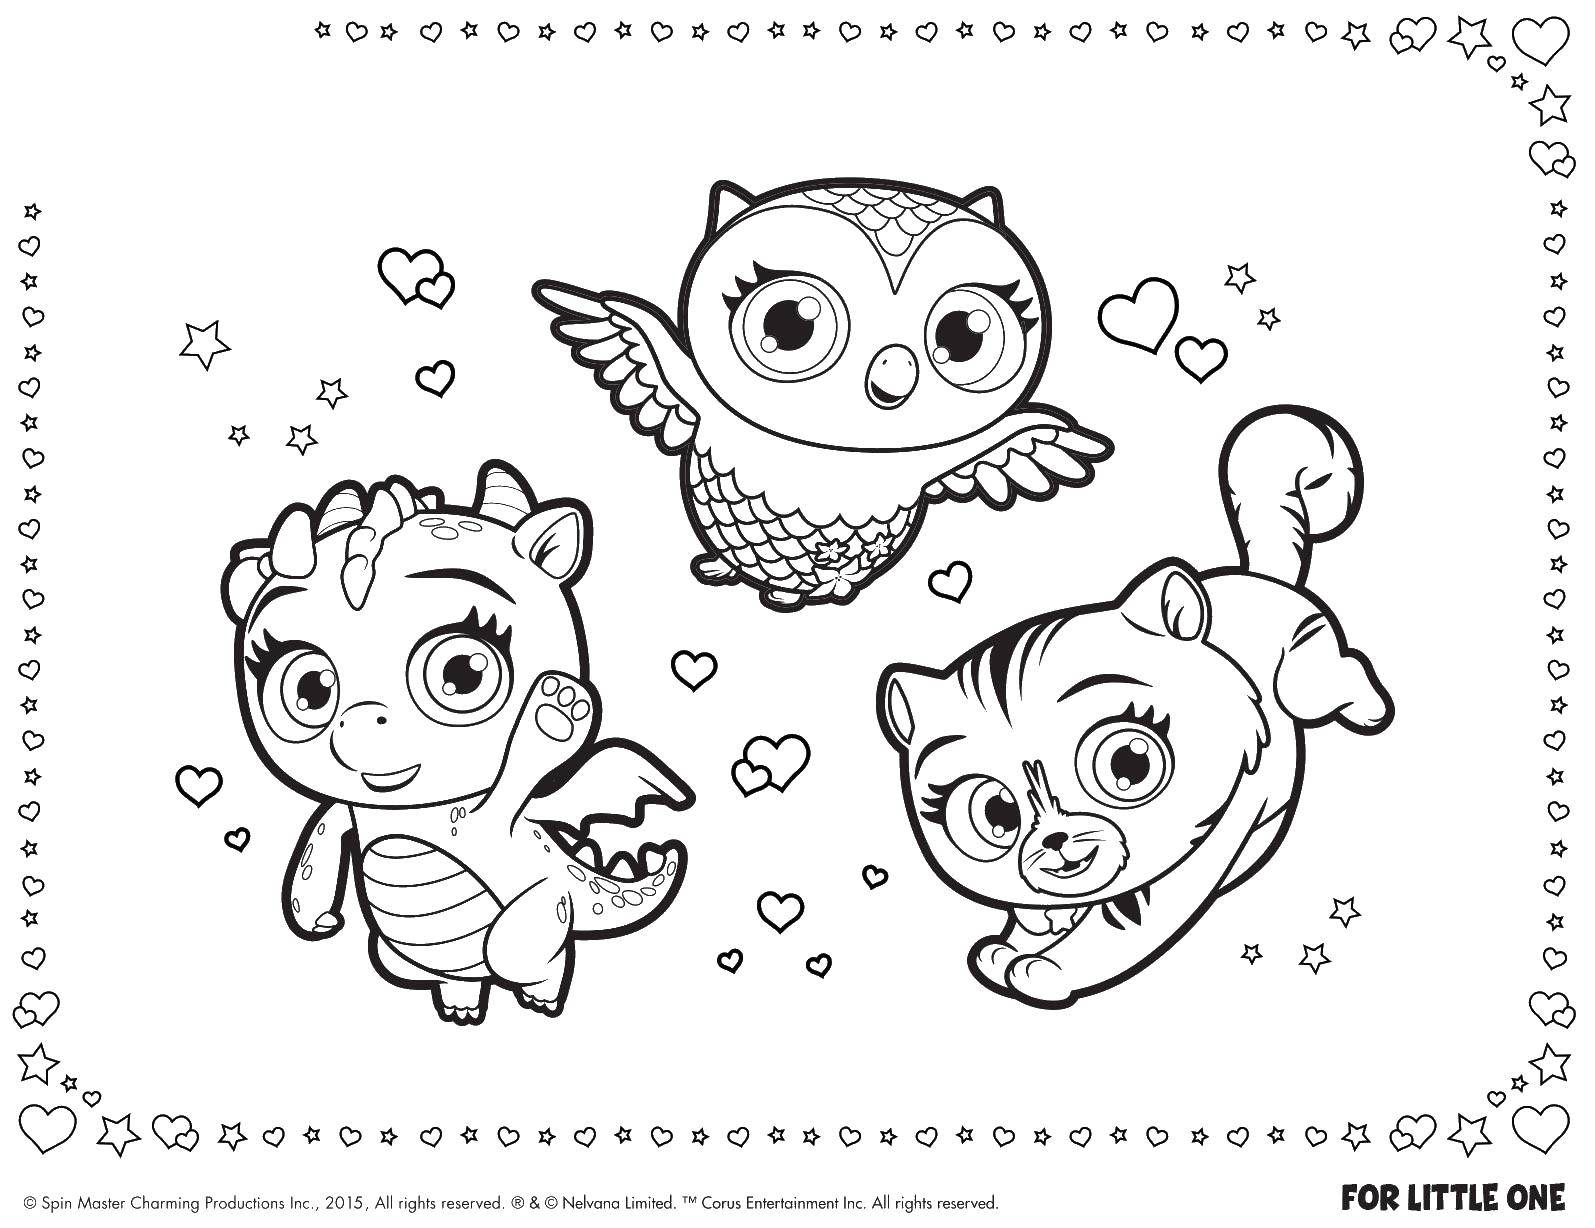 Coloring The dragon, the owl and the Pussycat. Category cartoons. Tags:  cartoon, owl, cat, dragon.